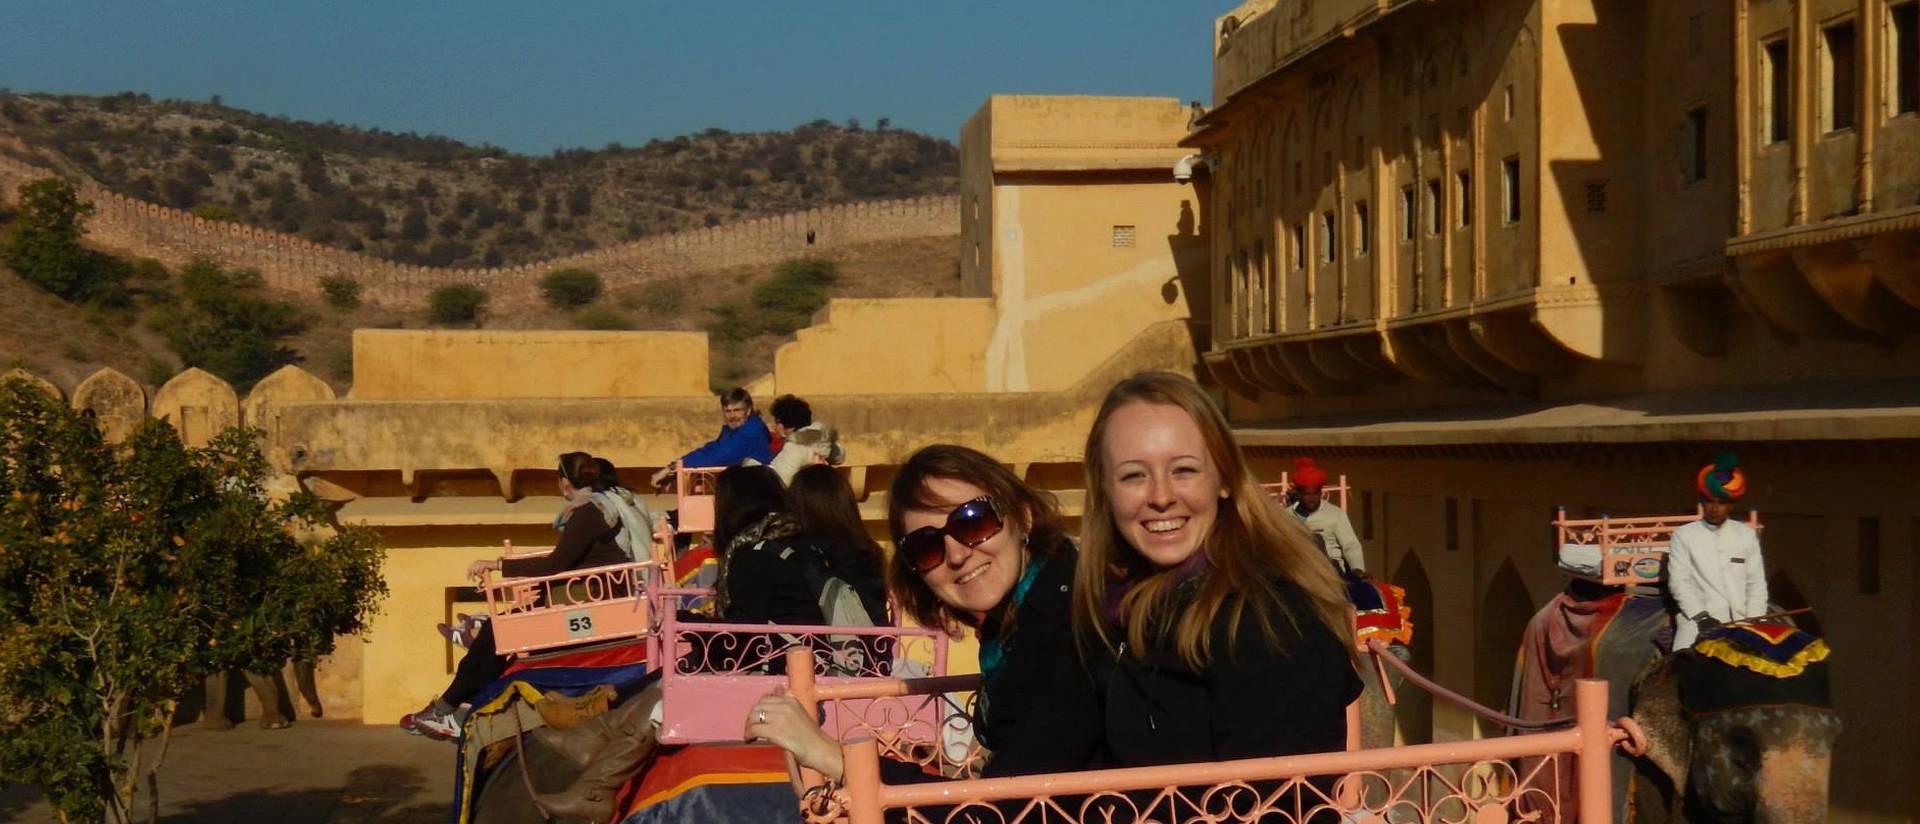 Vanessa Kane (left) riding up to Amber Fort